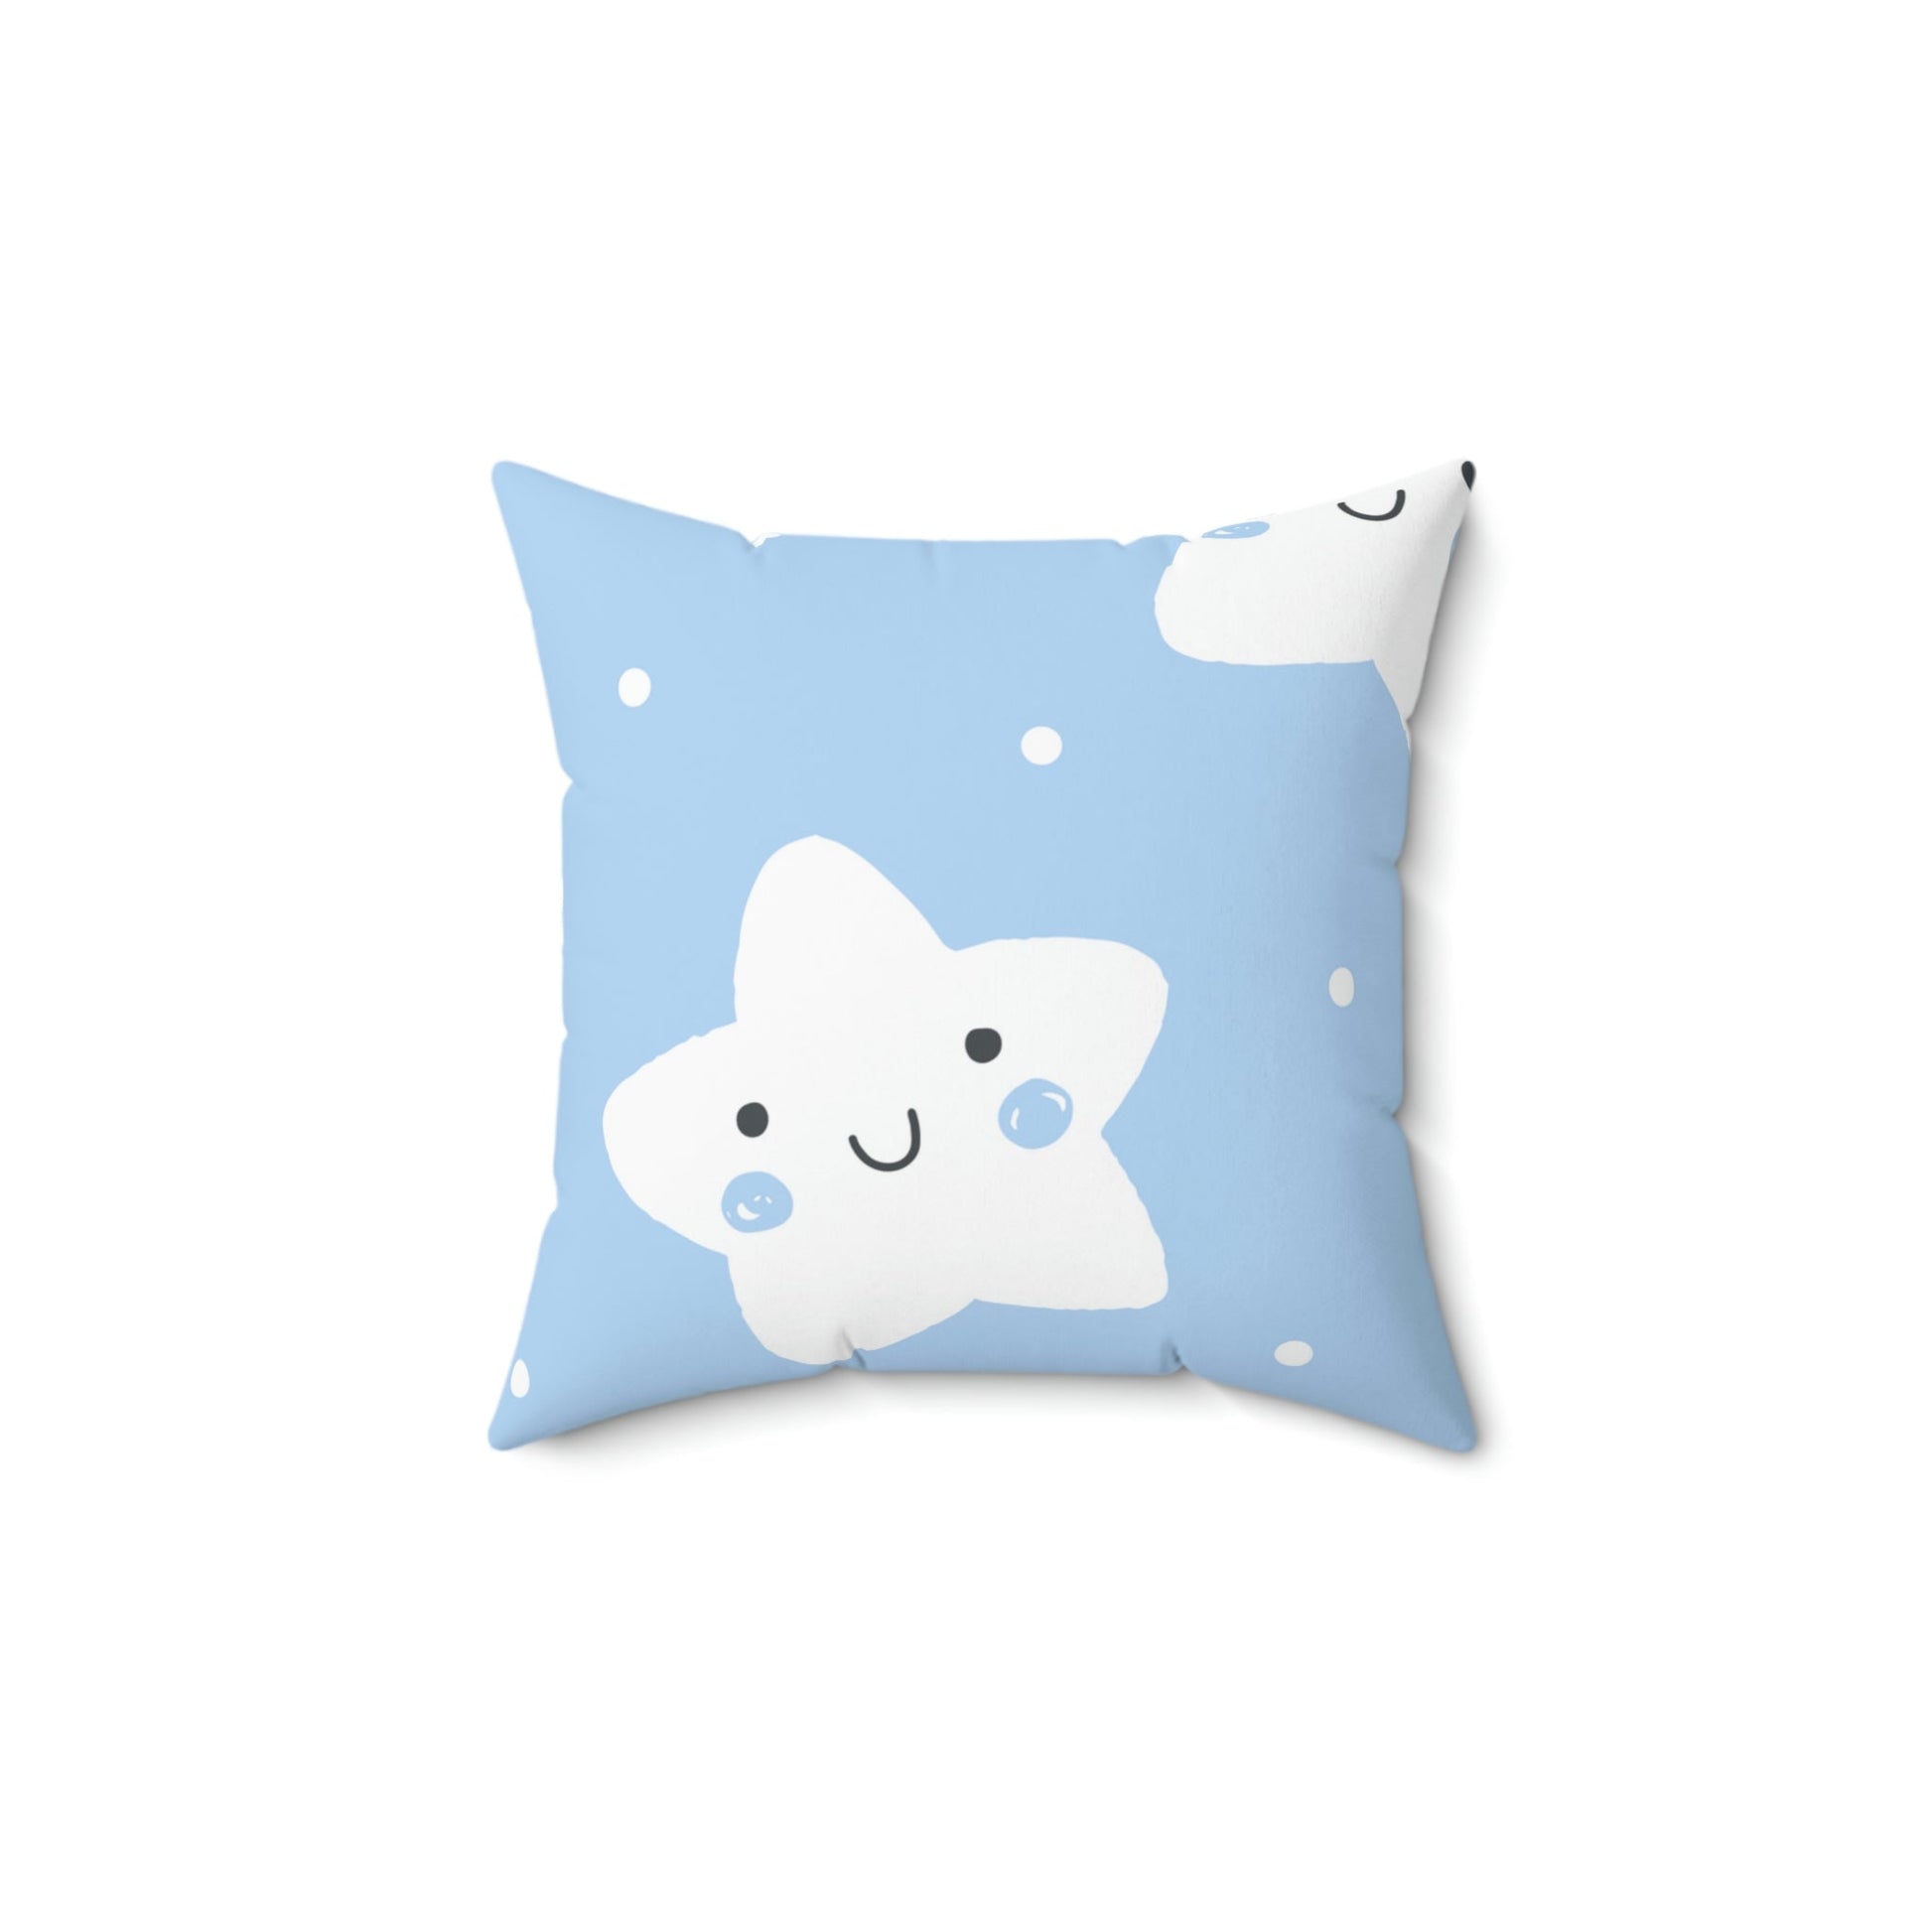 Sleepy Baby Star Blue Square Pillow Home Decor Pink Sweetheart